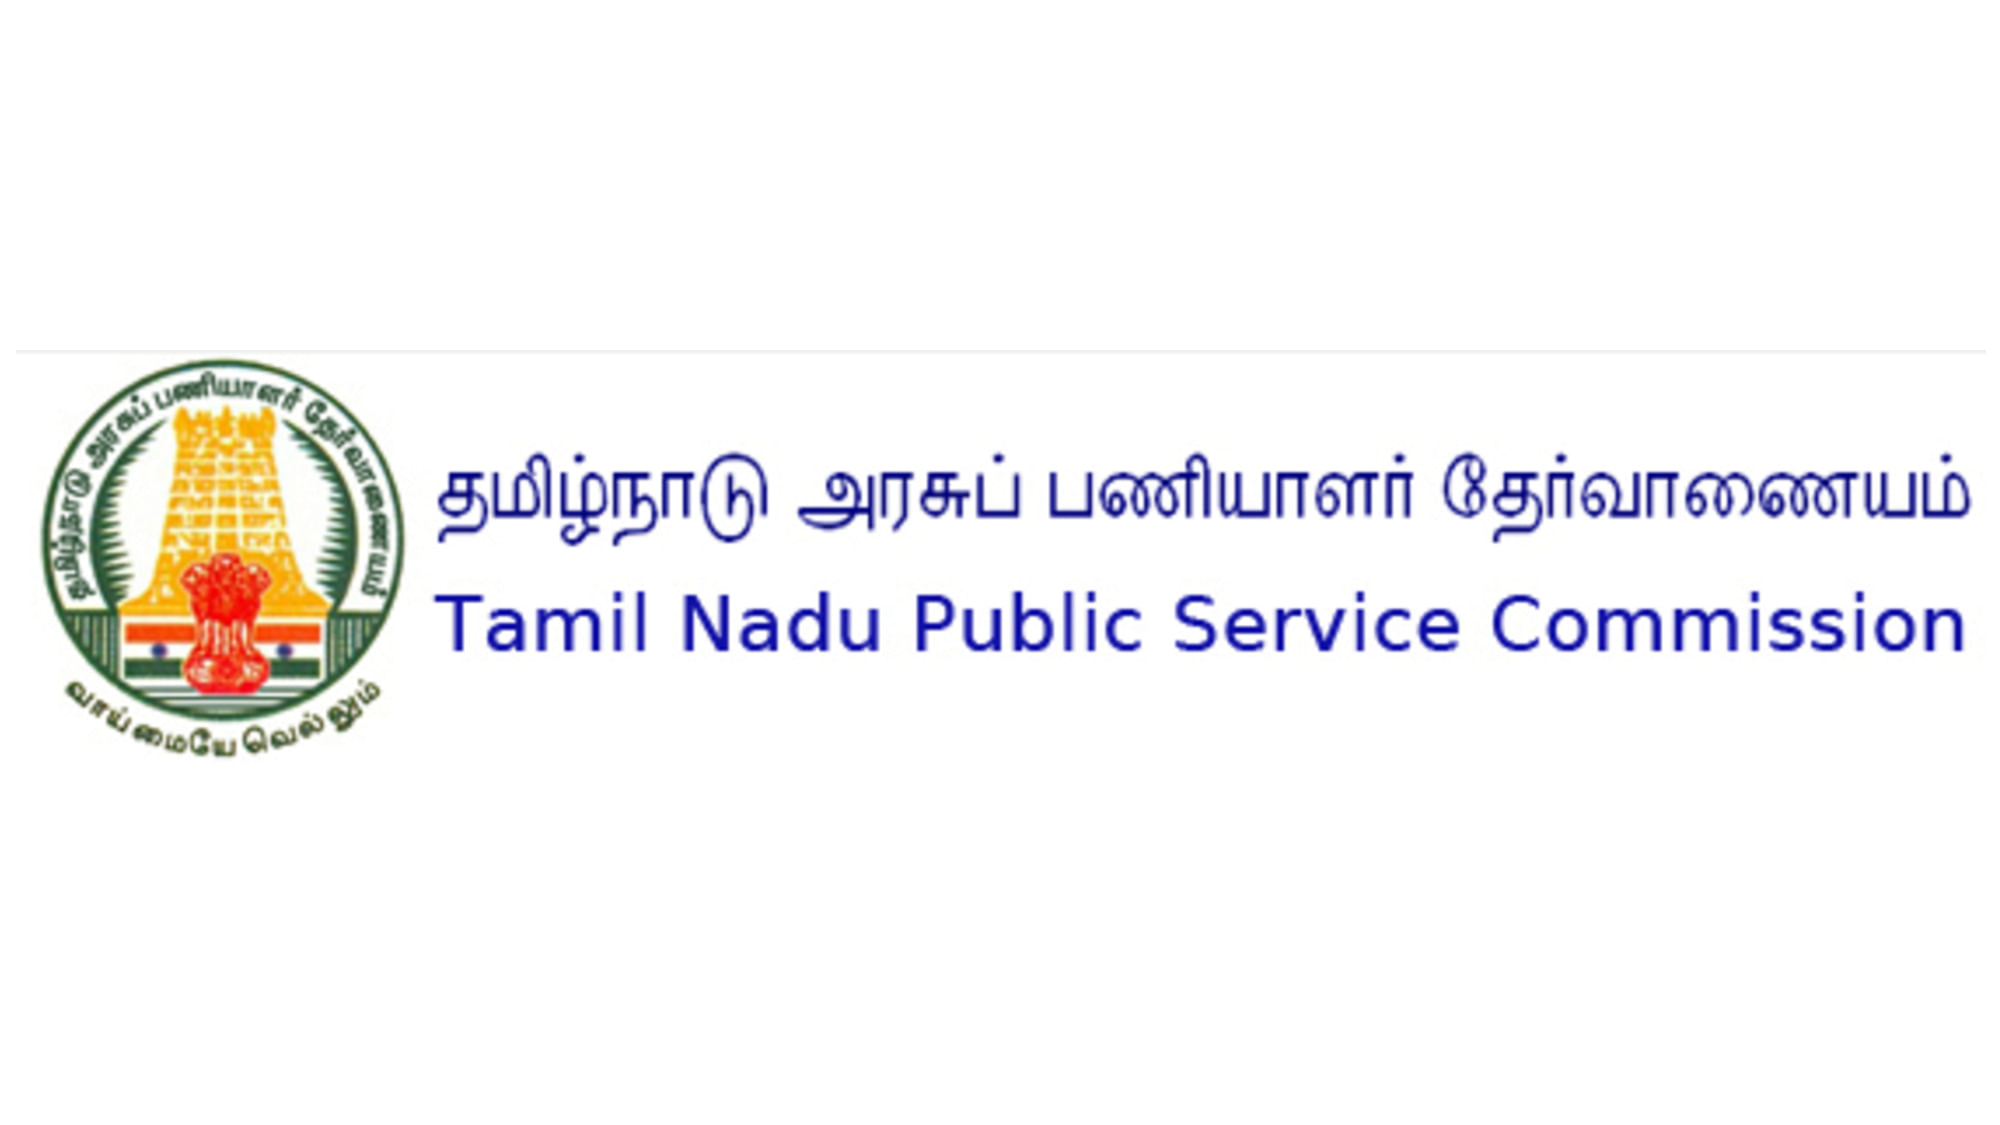 CB-CID sources said more than 50 people have been involved in the scam and two tahsildars and 10 other government officials are being interrogated here. (Screengrab: TNPSC website)